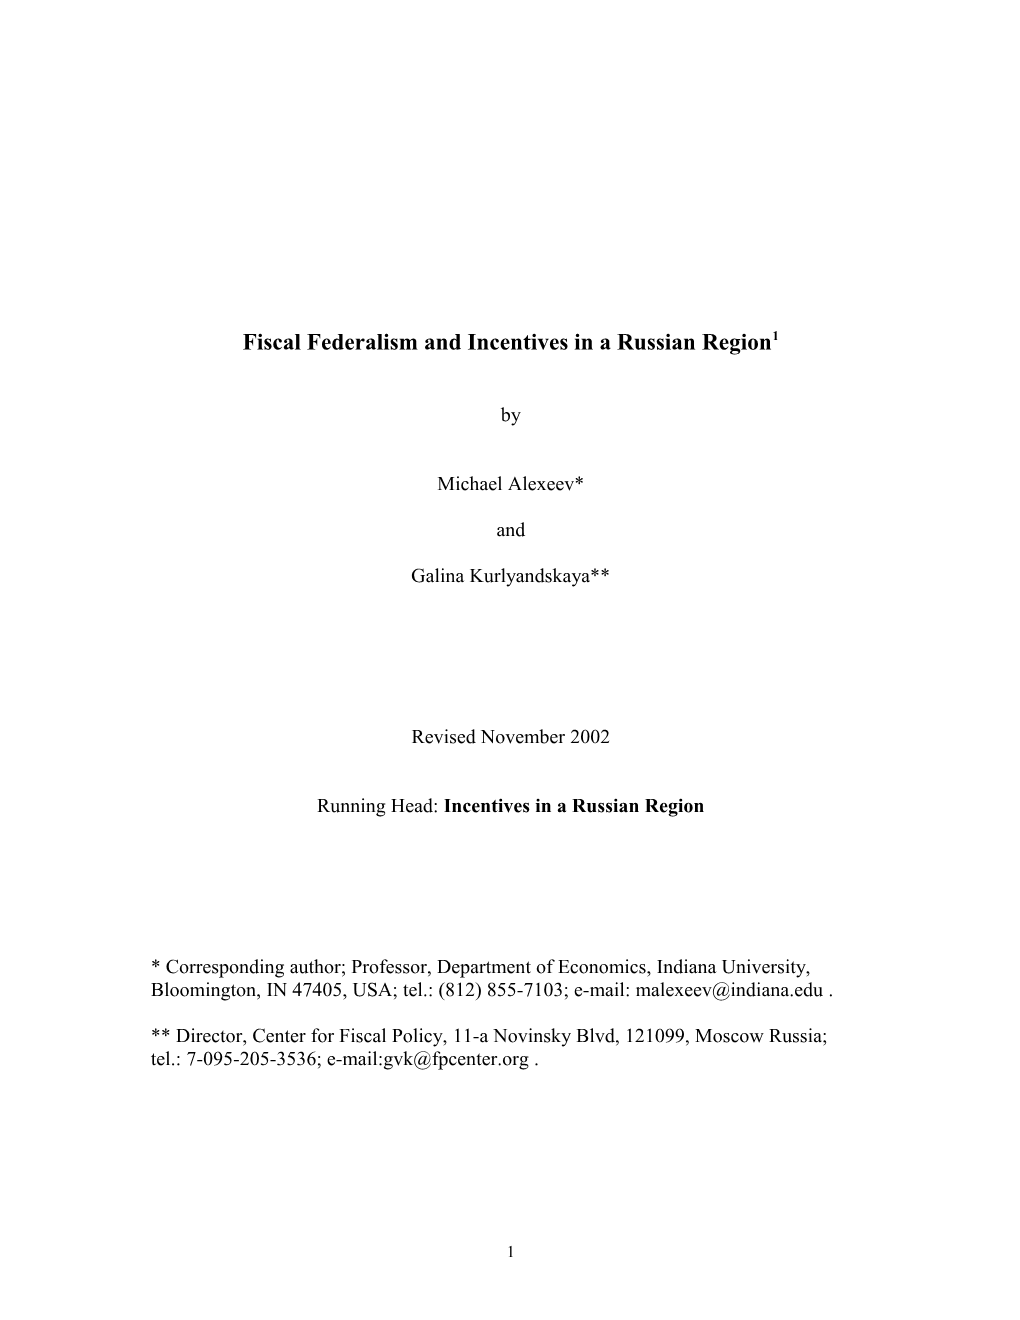 Outline of Fiscal Federalism and Incentives in a Russian Region